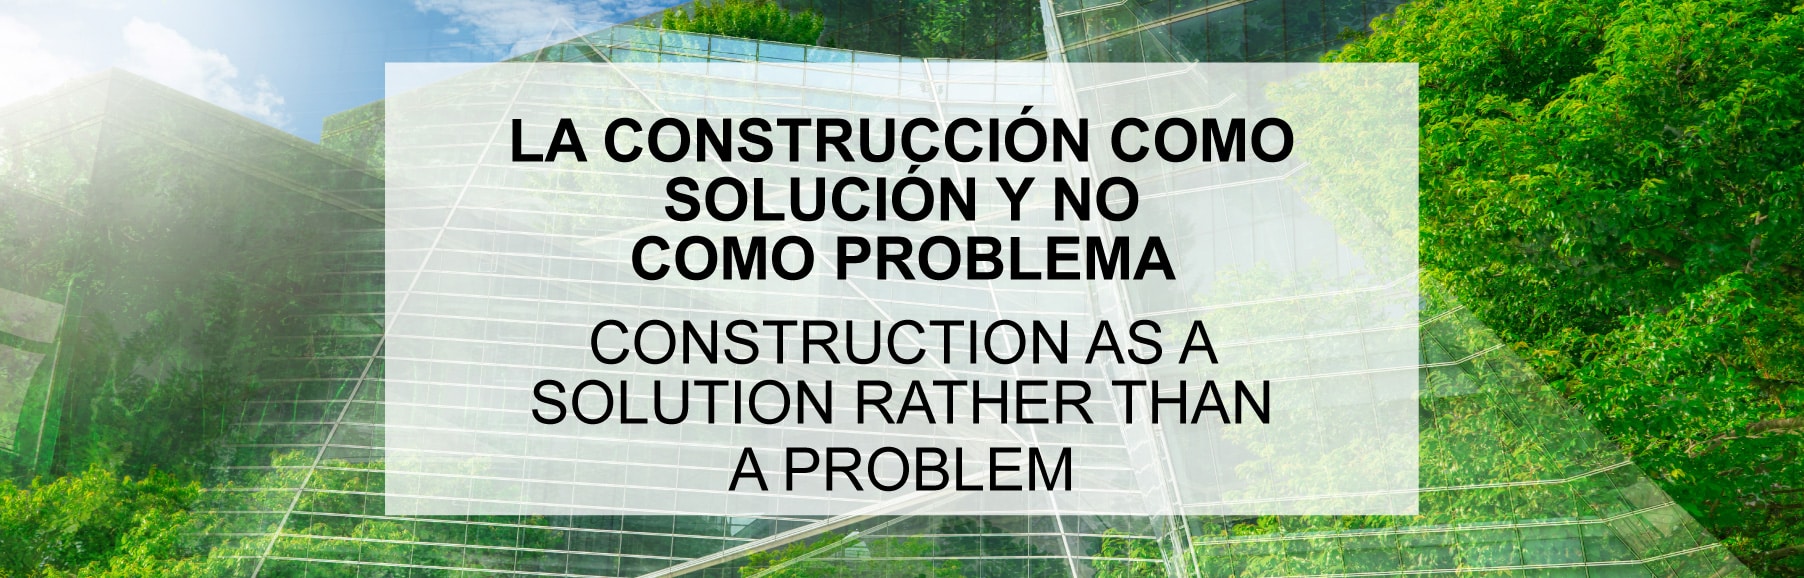 Construction as a solution rather than a problem